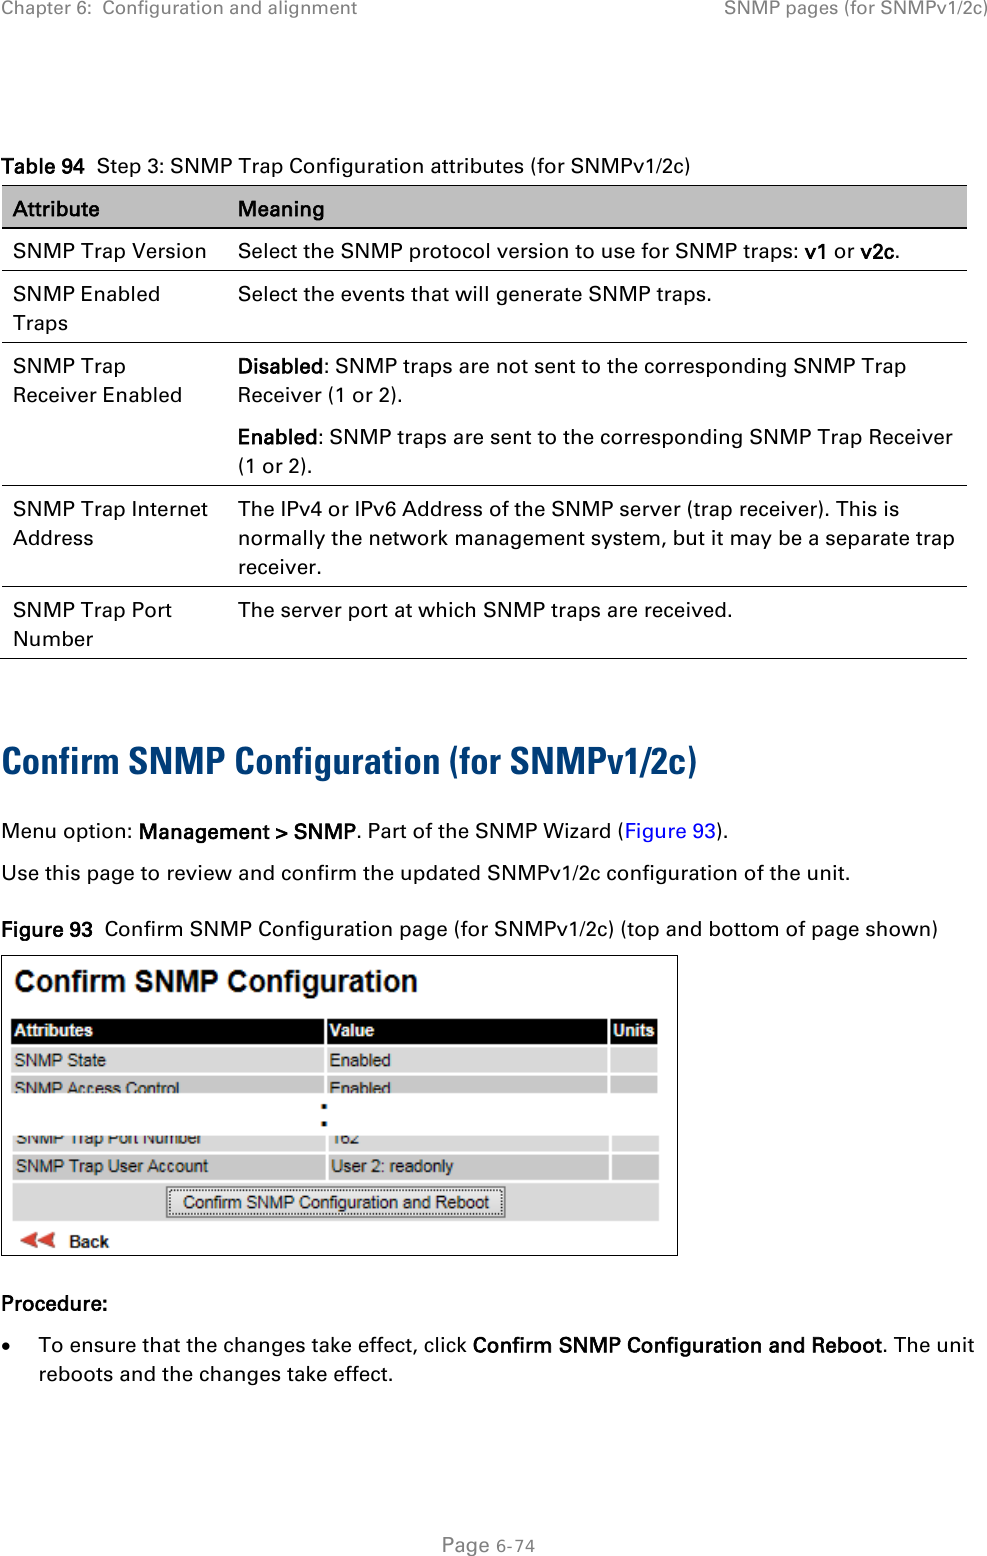 Chapter 6:  Configuration and alignment SNMP pages (for SNMPv1/2c)   Table 94  Step 3: SNMP Trap Configuration attributes (for SNMPv1/2c) Attribute Meaning SNMP Trap Version Select the SNMP protocol version to use for SNMP traps: v1 or v2c. SNMP Enabled Traps Select the events that will generate SNMP traps. SNMP Trap Receiver Enabled Disabled: SNMP traps are not sent to the corresponding SNMP Trap Receiver (1 or 2). Enabled: SNMP traps are sent to the corresponding SNMP Trap Receiver (1 or 2). SNMP Trap Internet Address The IPv4 or IPv6 Address of the SNMP server (trap receiver). This is normally the network management system, but it may be a separate trap receiver. SNMP Trap Port Number The server port at which SNMP traps are received.  Confirm SNMP Configuration (for SNMPv1/2c)  Menu option: Management &gt; SNMP. Part of the SNMP Wizard (Figure 93). Use this page to review and confirm the updated SNMPv1/2c configuration of the unit. Figure 93  Confirm SNMP Configuration page (for SNMPv1/2c) (top and bottom of page shown)  Procedure: • To ensure that the changes take effect, click Confirm SNMP Configuration and Reboot. The unit reboots and the changes take effect.   Page 6-74 